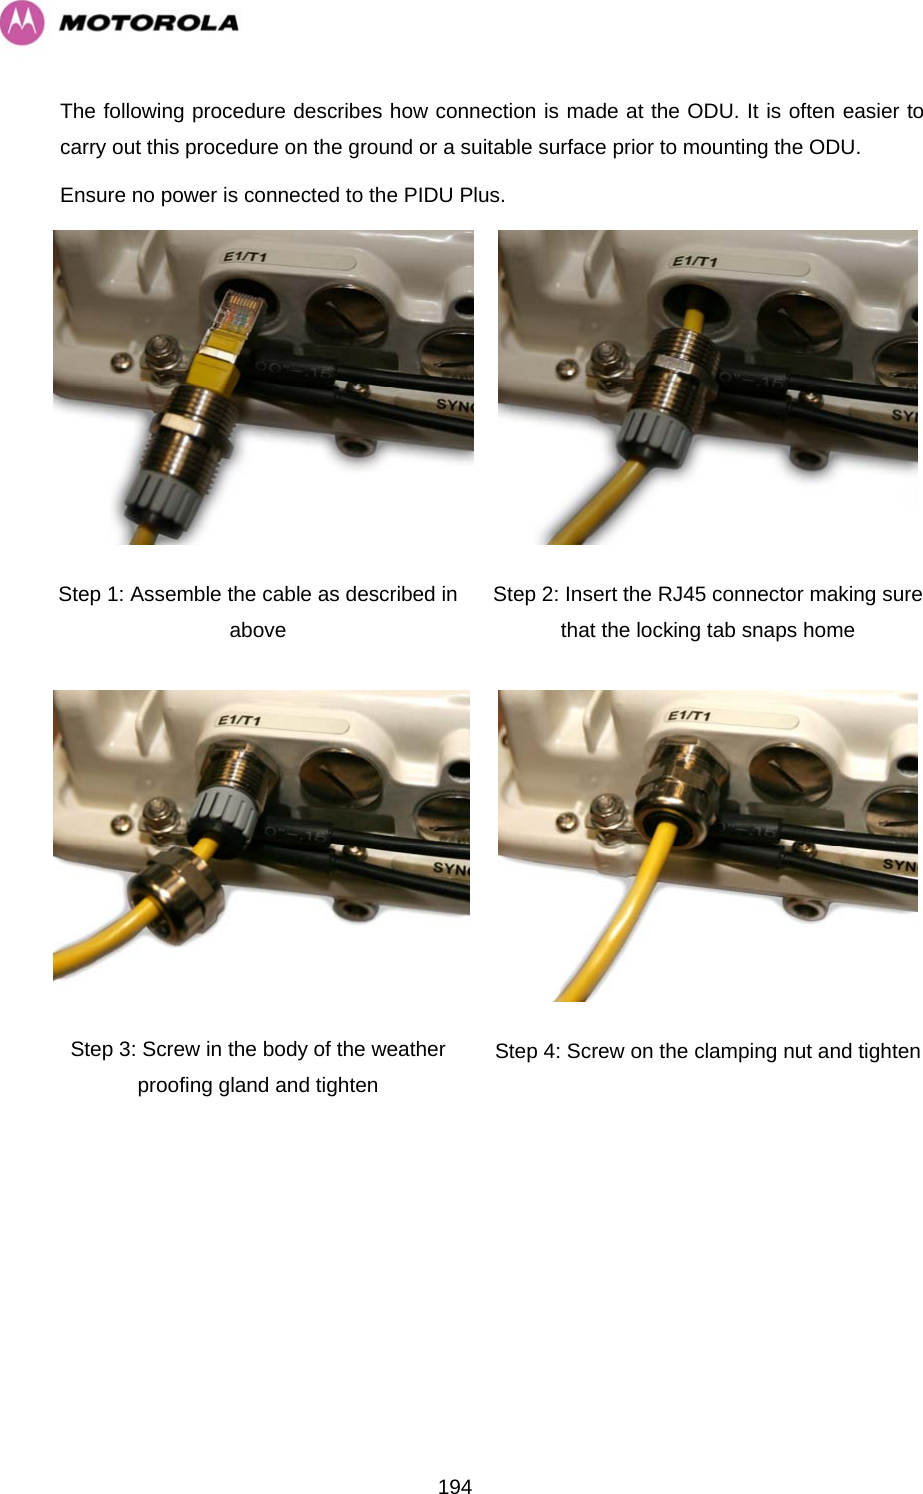   194The following procedure describes how connection is made at the ODU. It is often easier to carry out this procedure on the ground or a suitable surface prior to mounting the ODU.  Ensure no power is connected to the PIDU Plus.  Step 1: Assemble the cable as described in above  Step 2: Insert the RJ45 connector making sure that the locking tab snaps home Step 3: Screw in the body of the weather proofing gland and tighten  Step 4: Screw on the clamping nut and tighten 